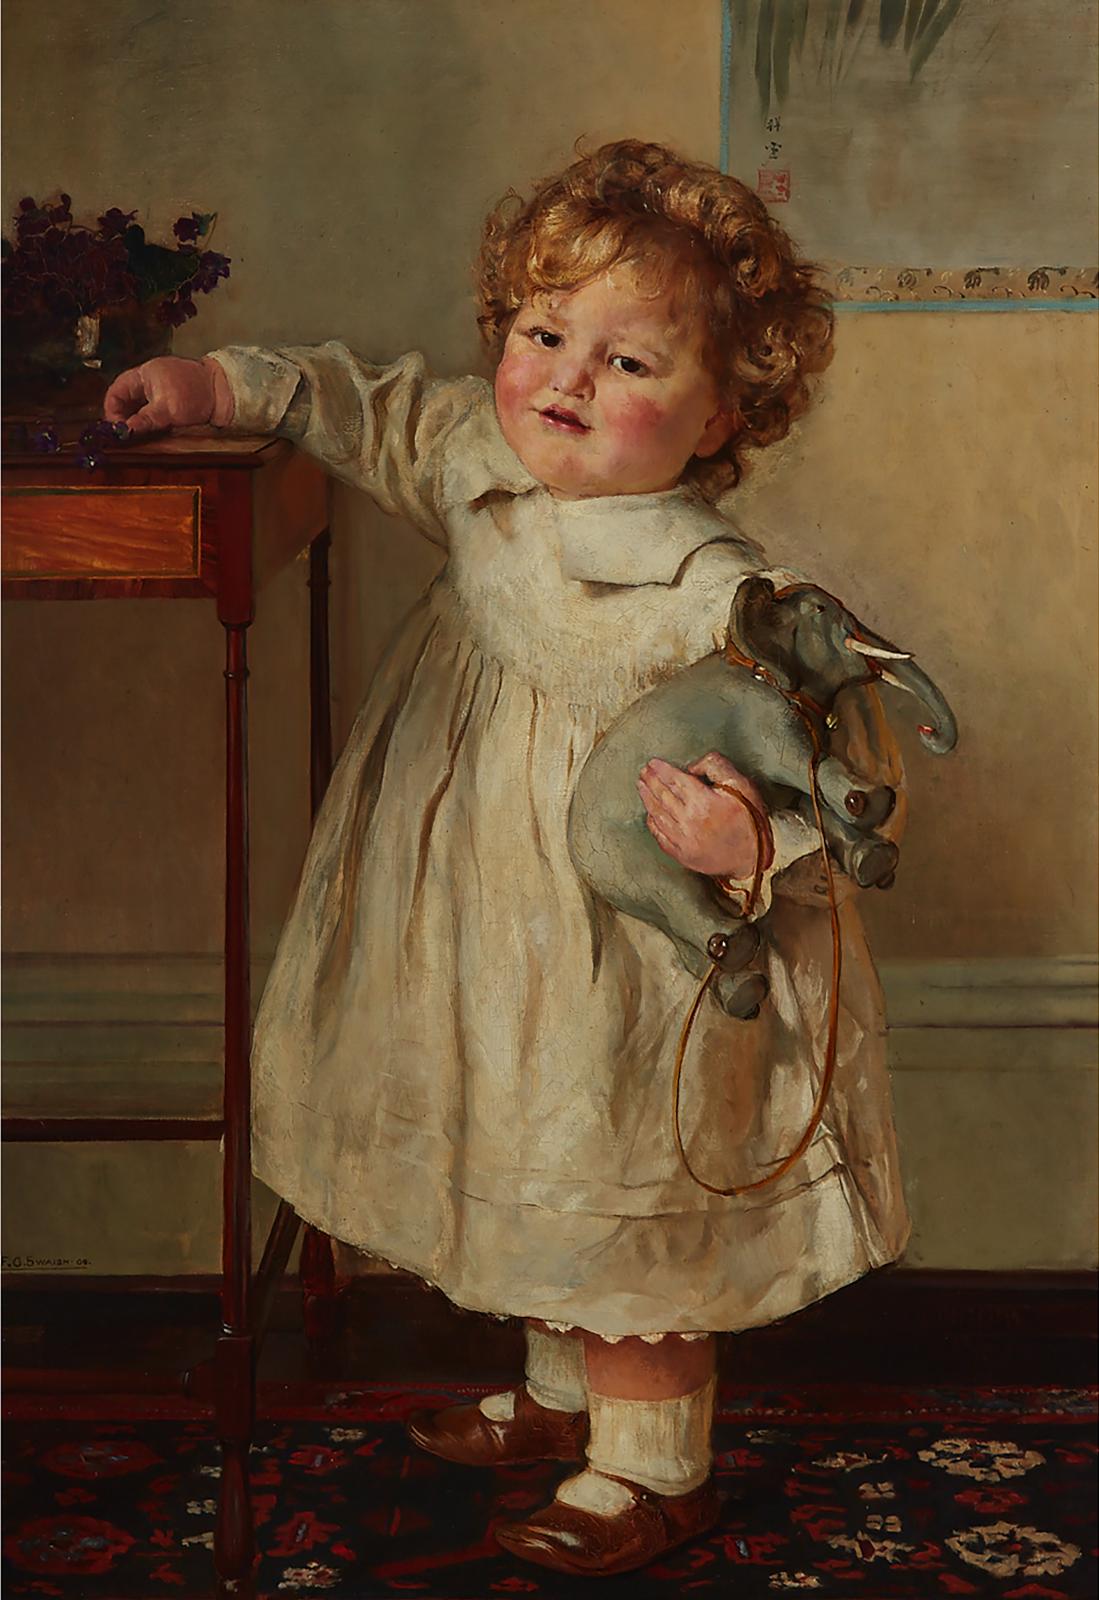 Frederick George Swaish (1879-1931) - Portrait Of John Collingwood Reade At Age 2, 1906